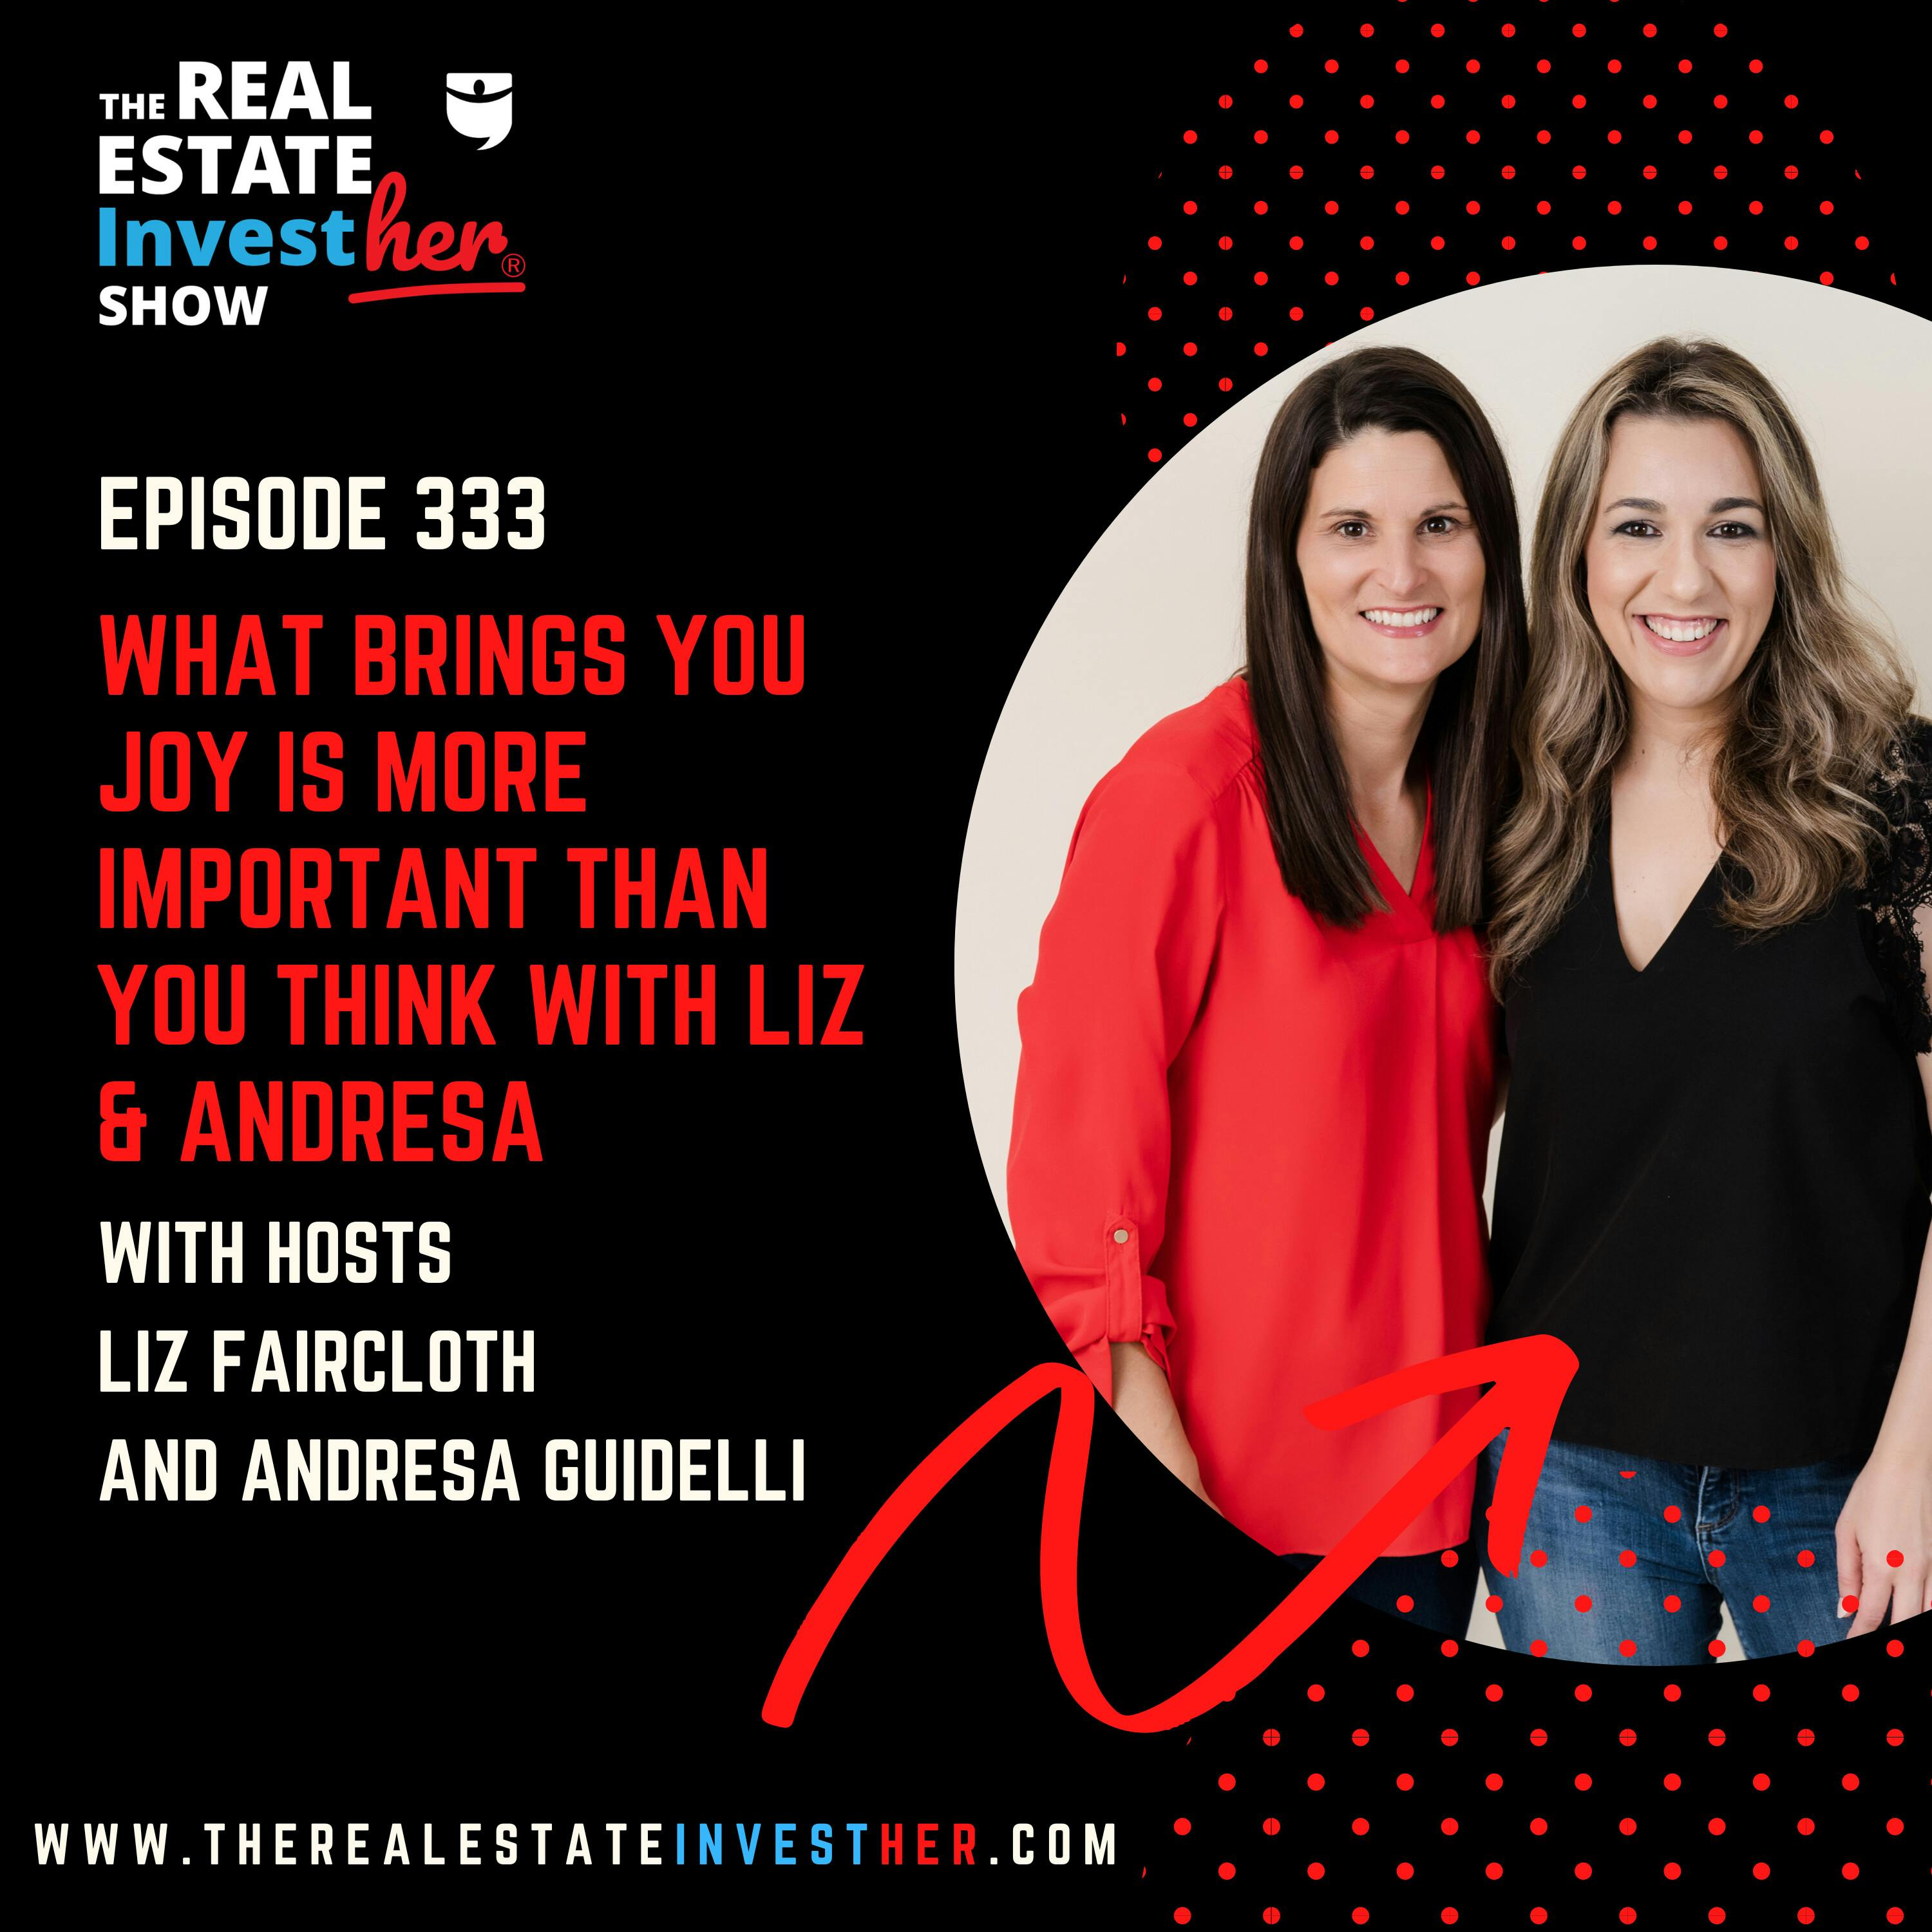 What Brings You Joy is More Important Than You Think with Liz & Andresa (Minisode)